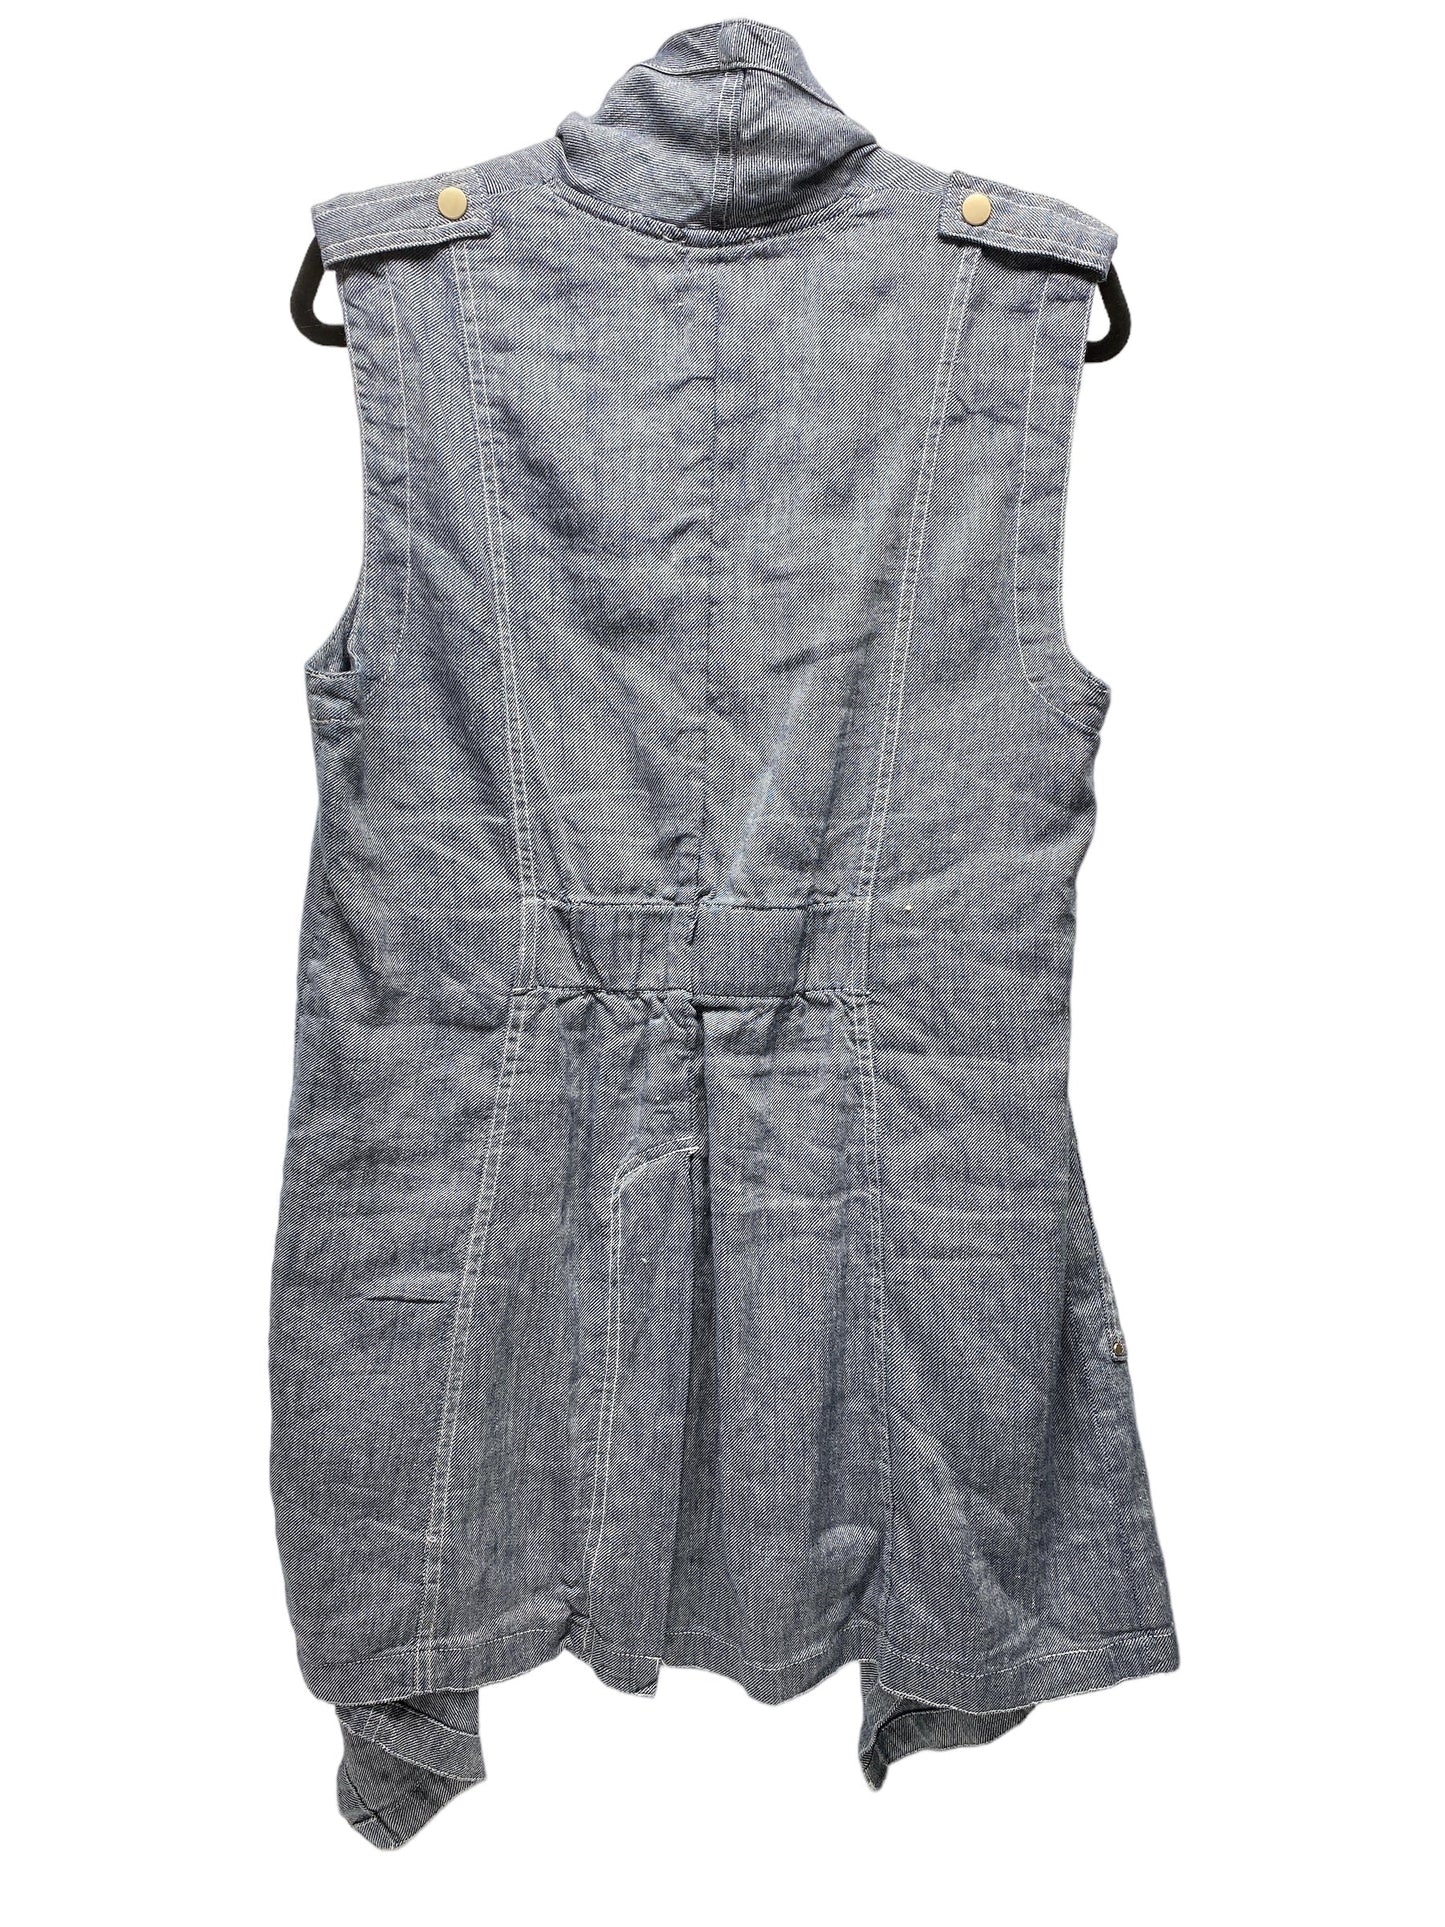 Vest Other By Jones New York  Size: M